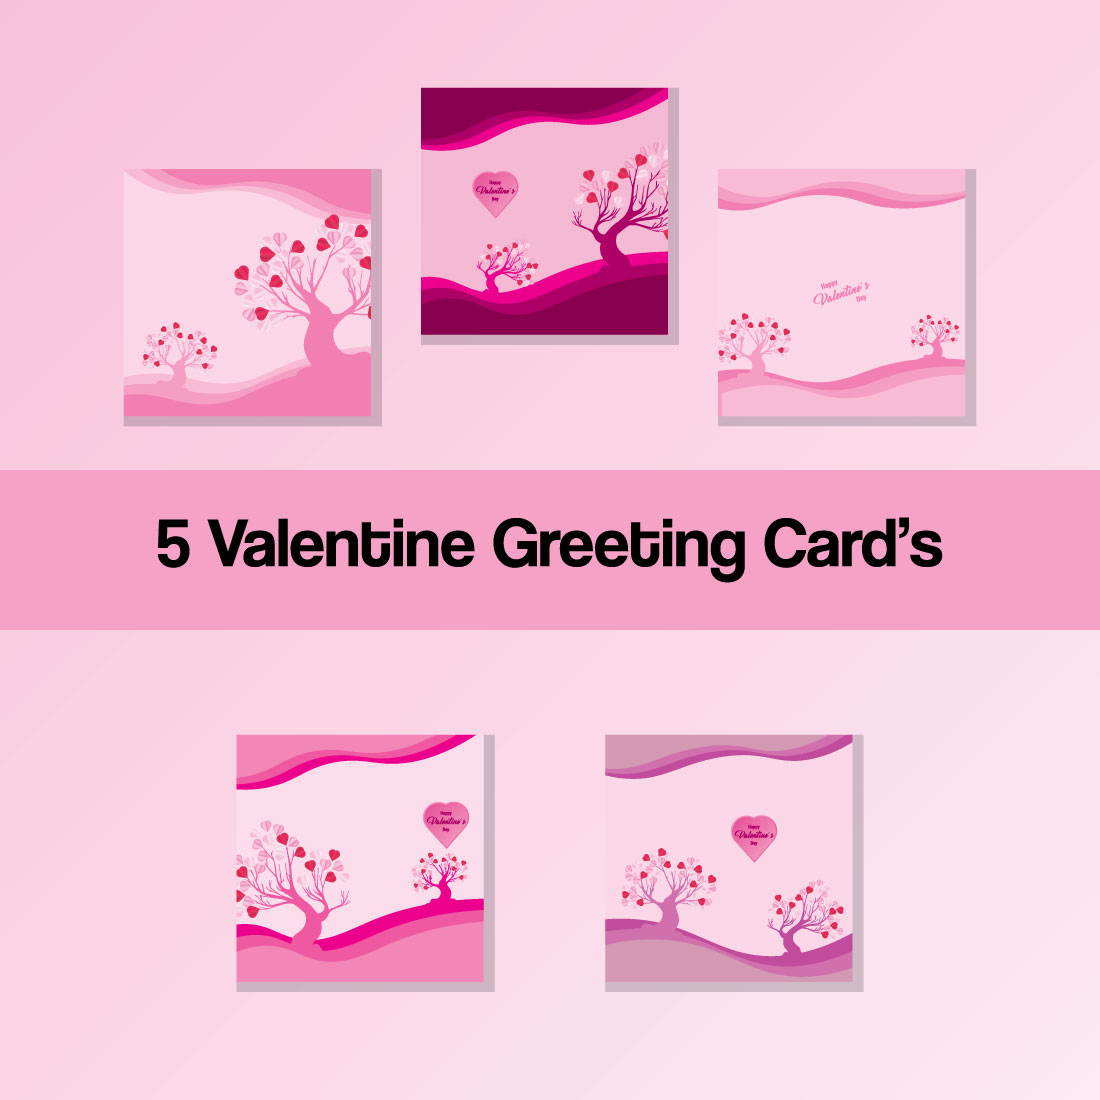 5 Valentine Greeting Cards preview image.